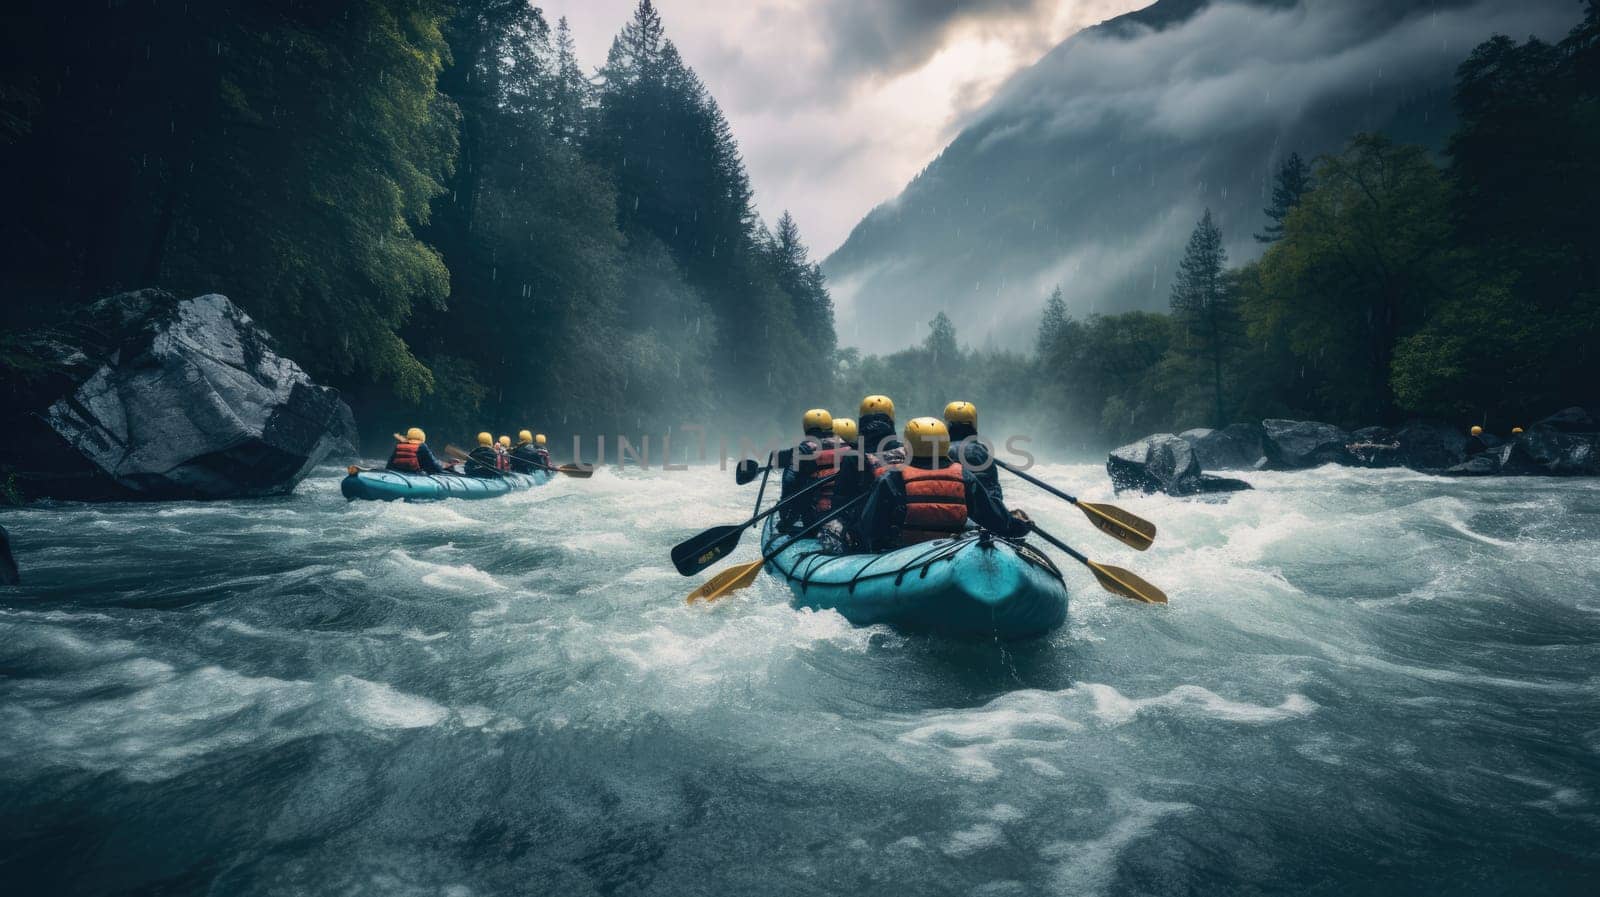 Group of travelers kayaking down a stormy river by natali_brill